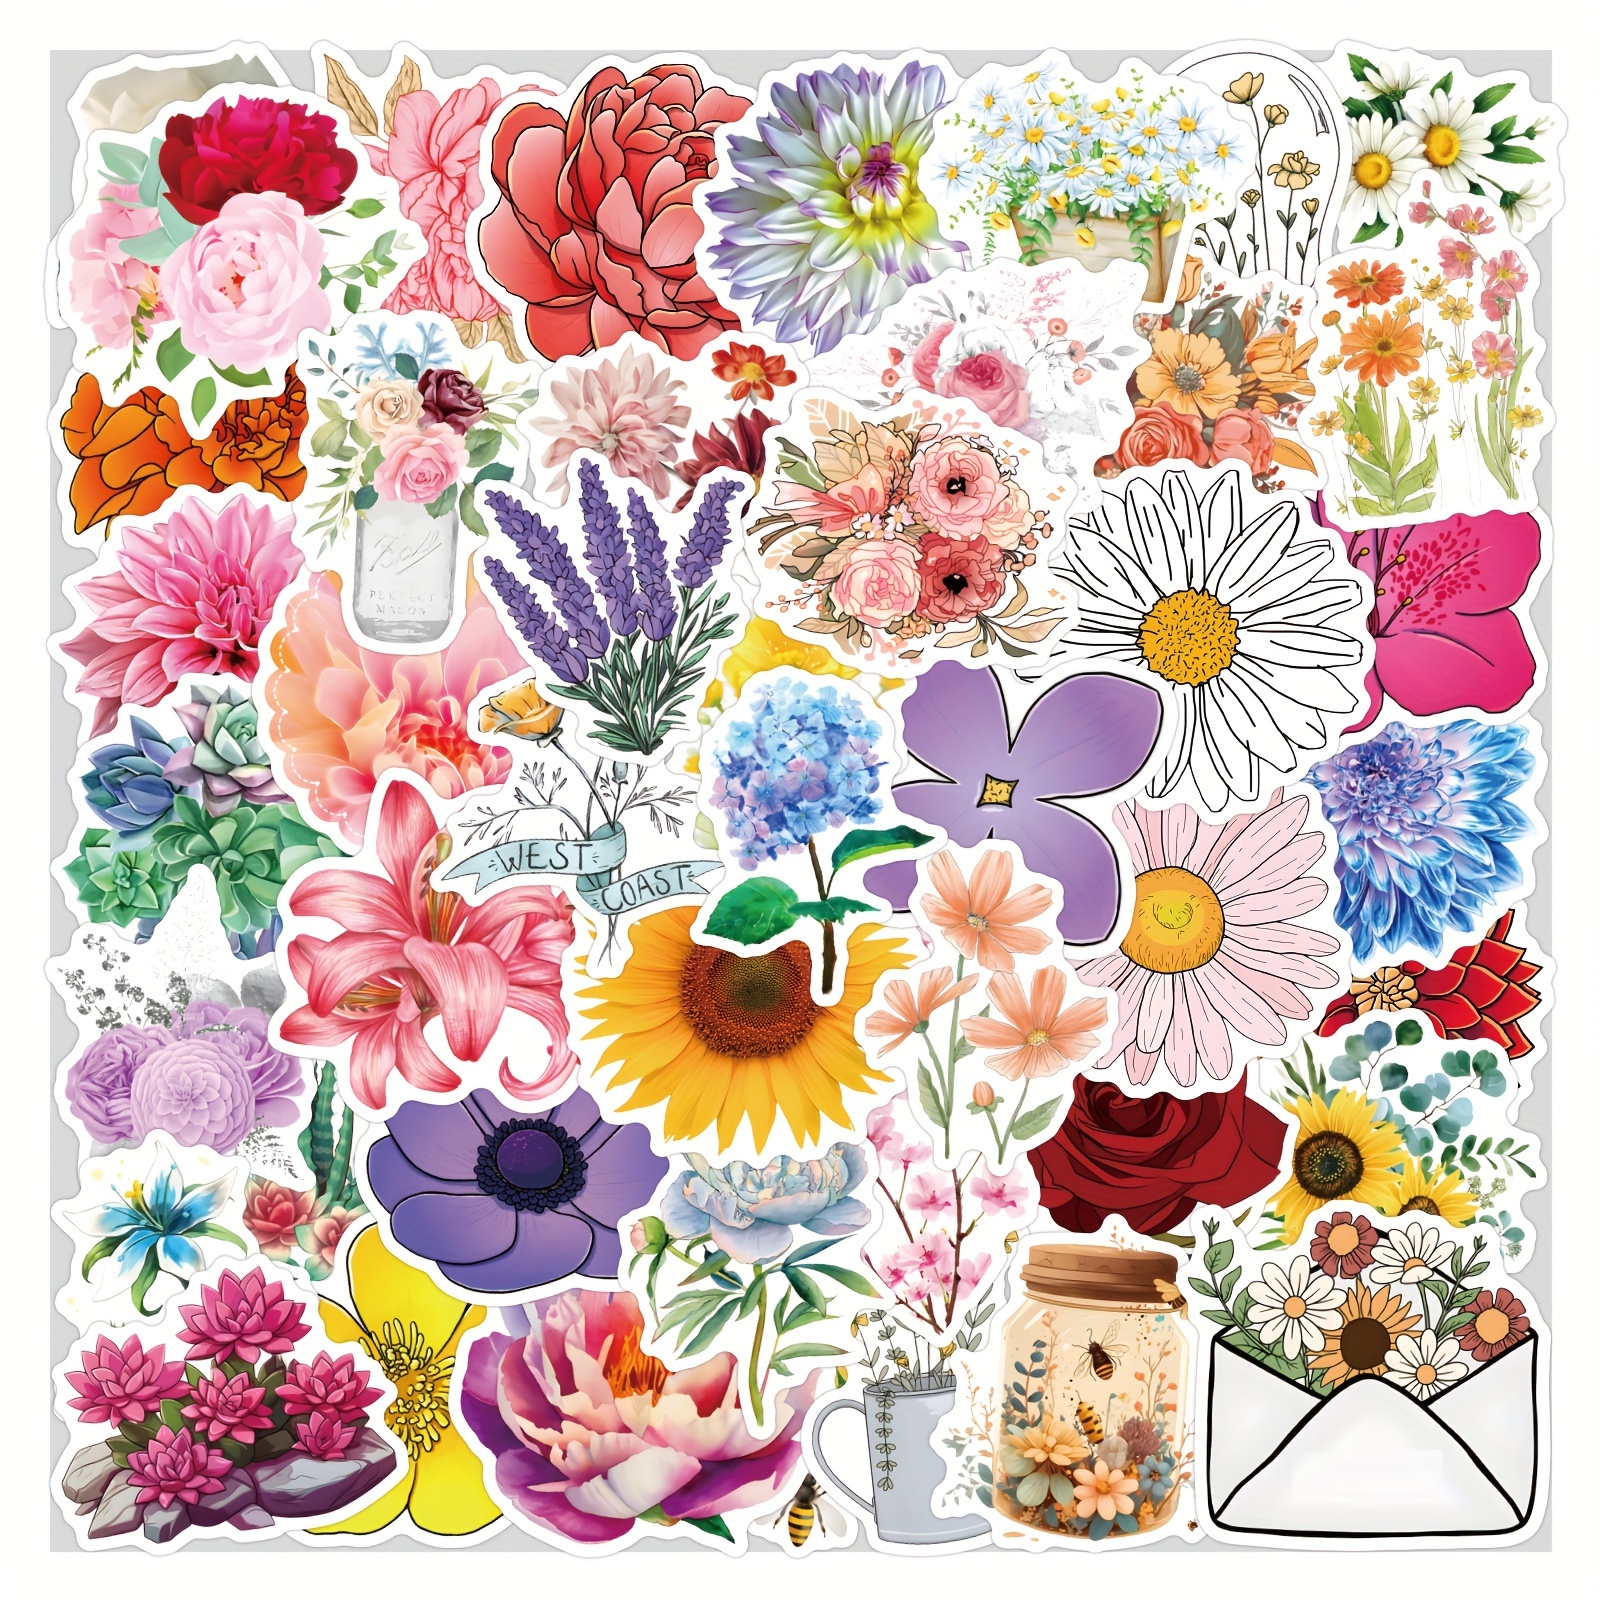 100pcs Flower Stickers Pack for Water Bottle, Cute, Vinyl, Aesthetic,  Trendy, Waterproof Floral Stickers and Decals for Hydroflask Laptop  Scrapbooking